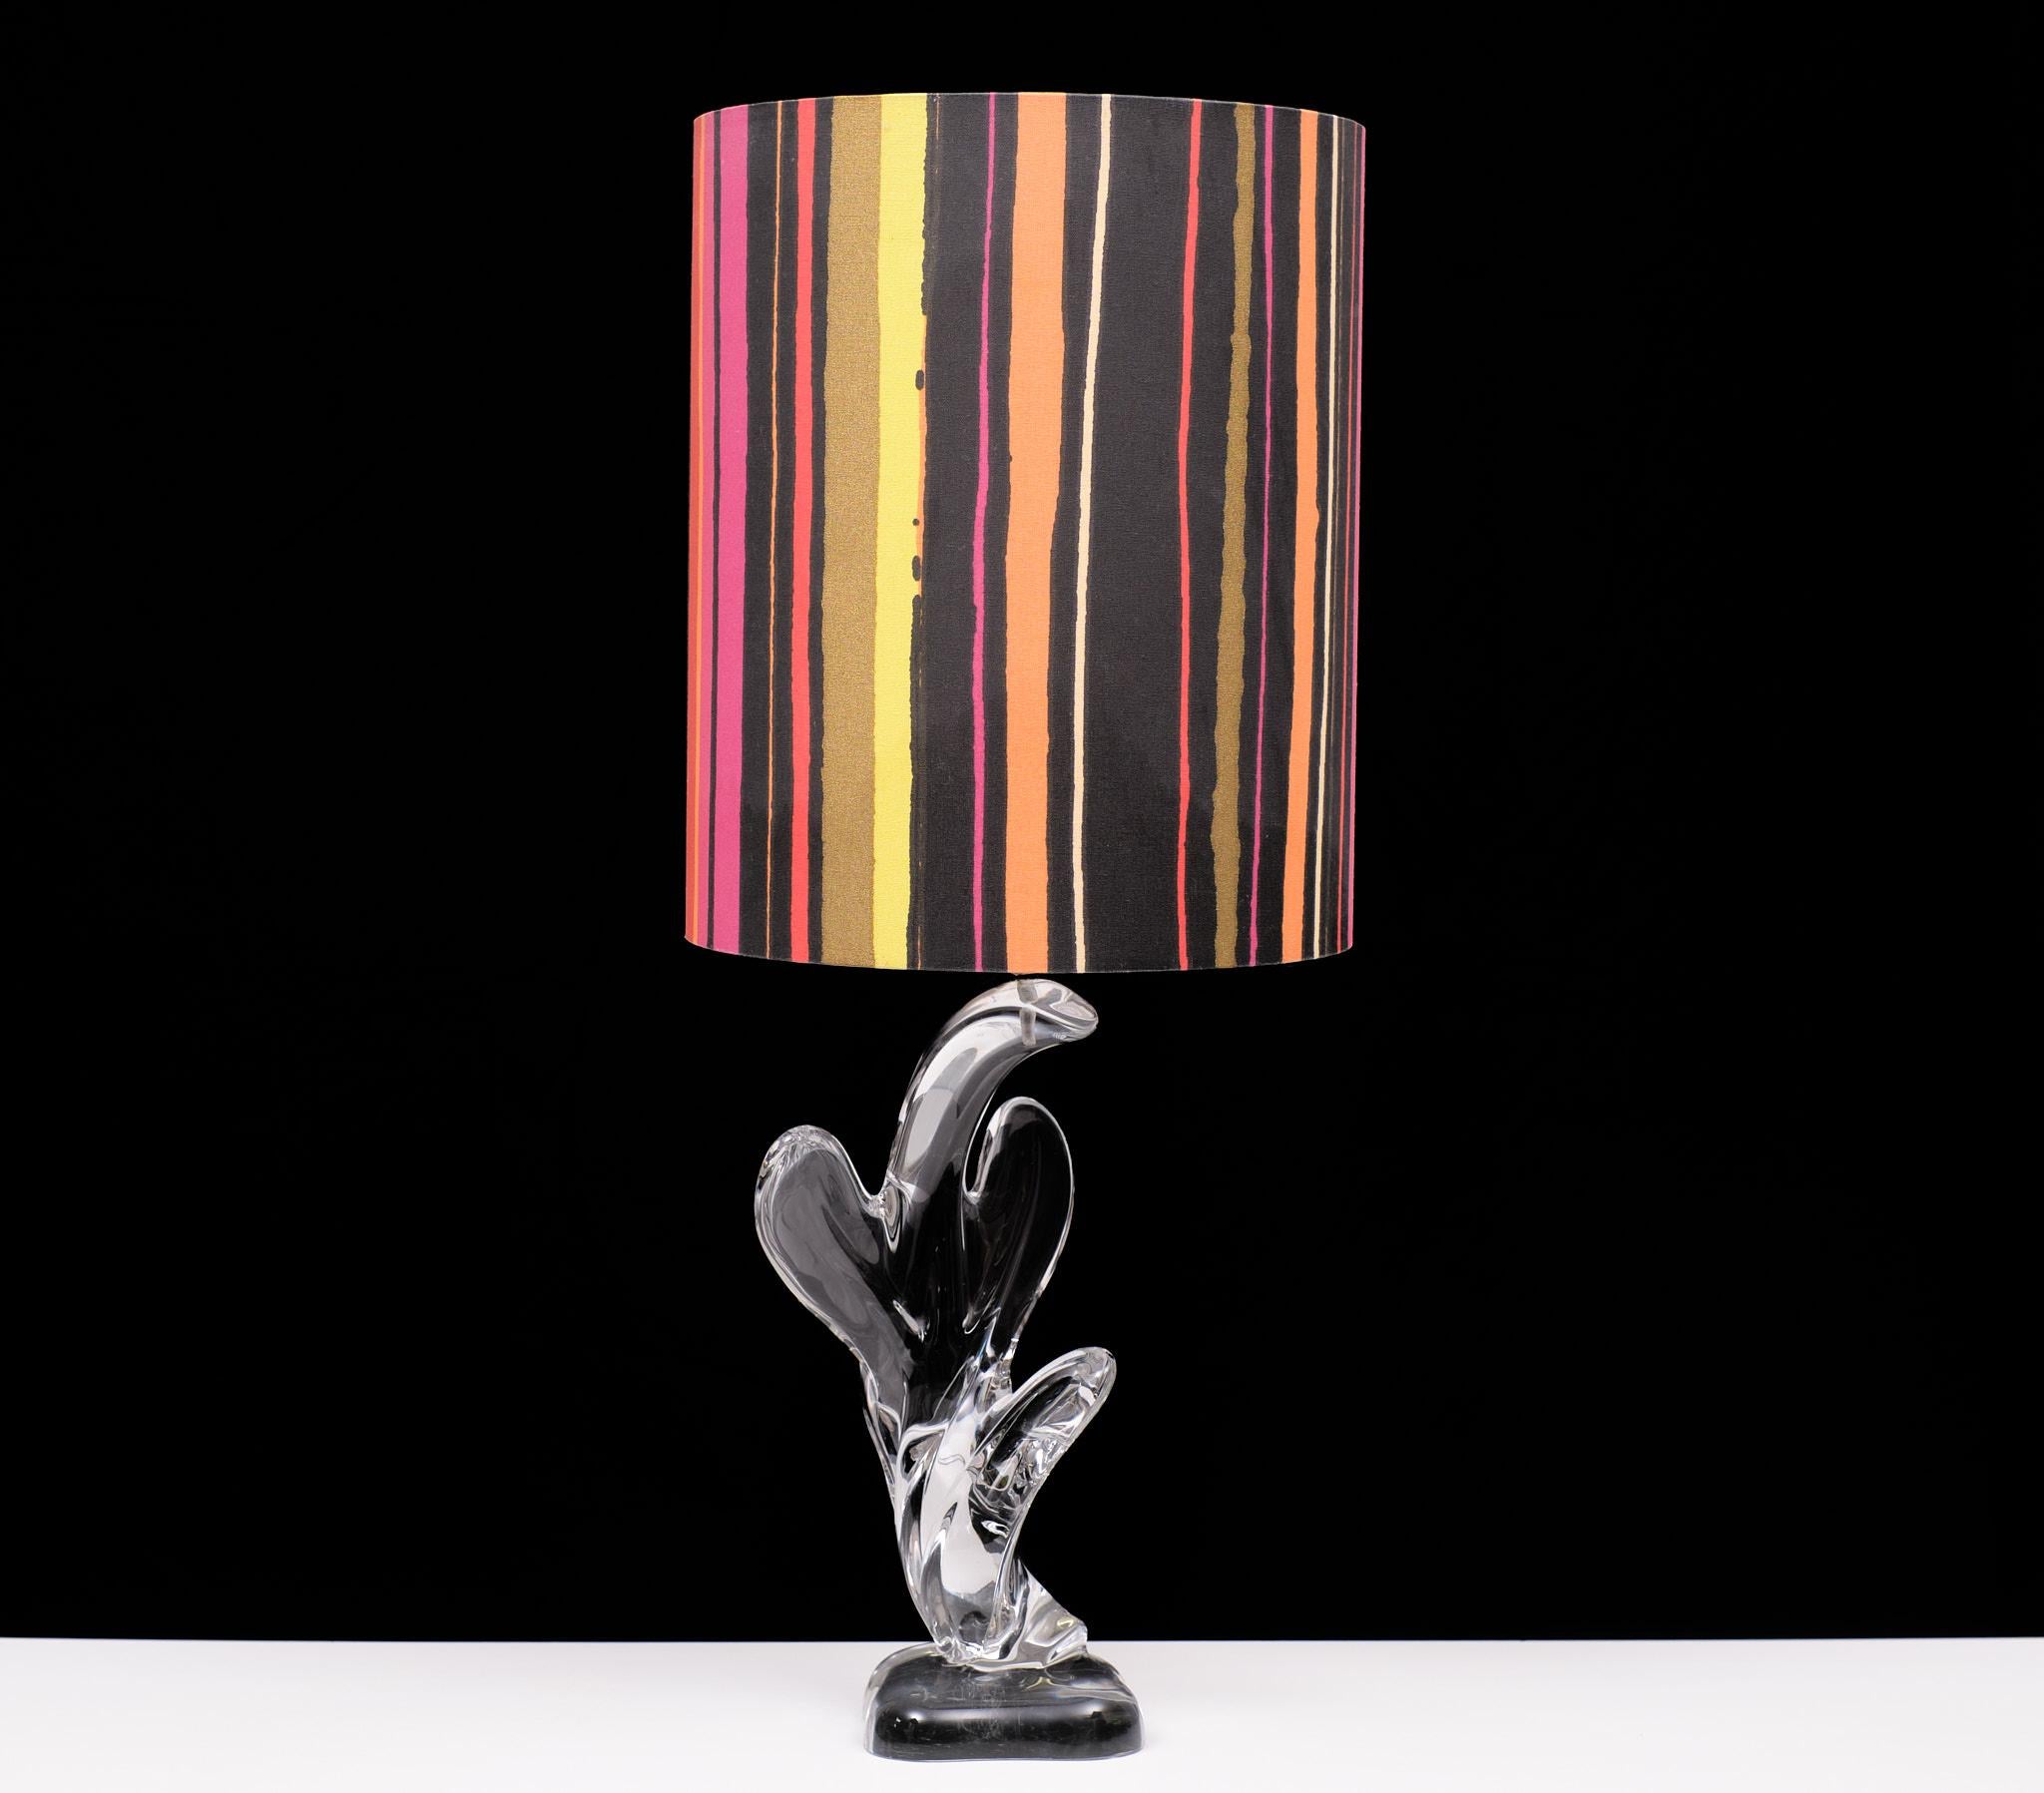 Chrystal solid glass Cactus table lamp manufactured by Vannes the Chatel France 1960s 
nice and stylish lamp, comes with a very nice colorful shade.